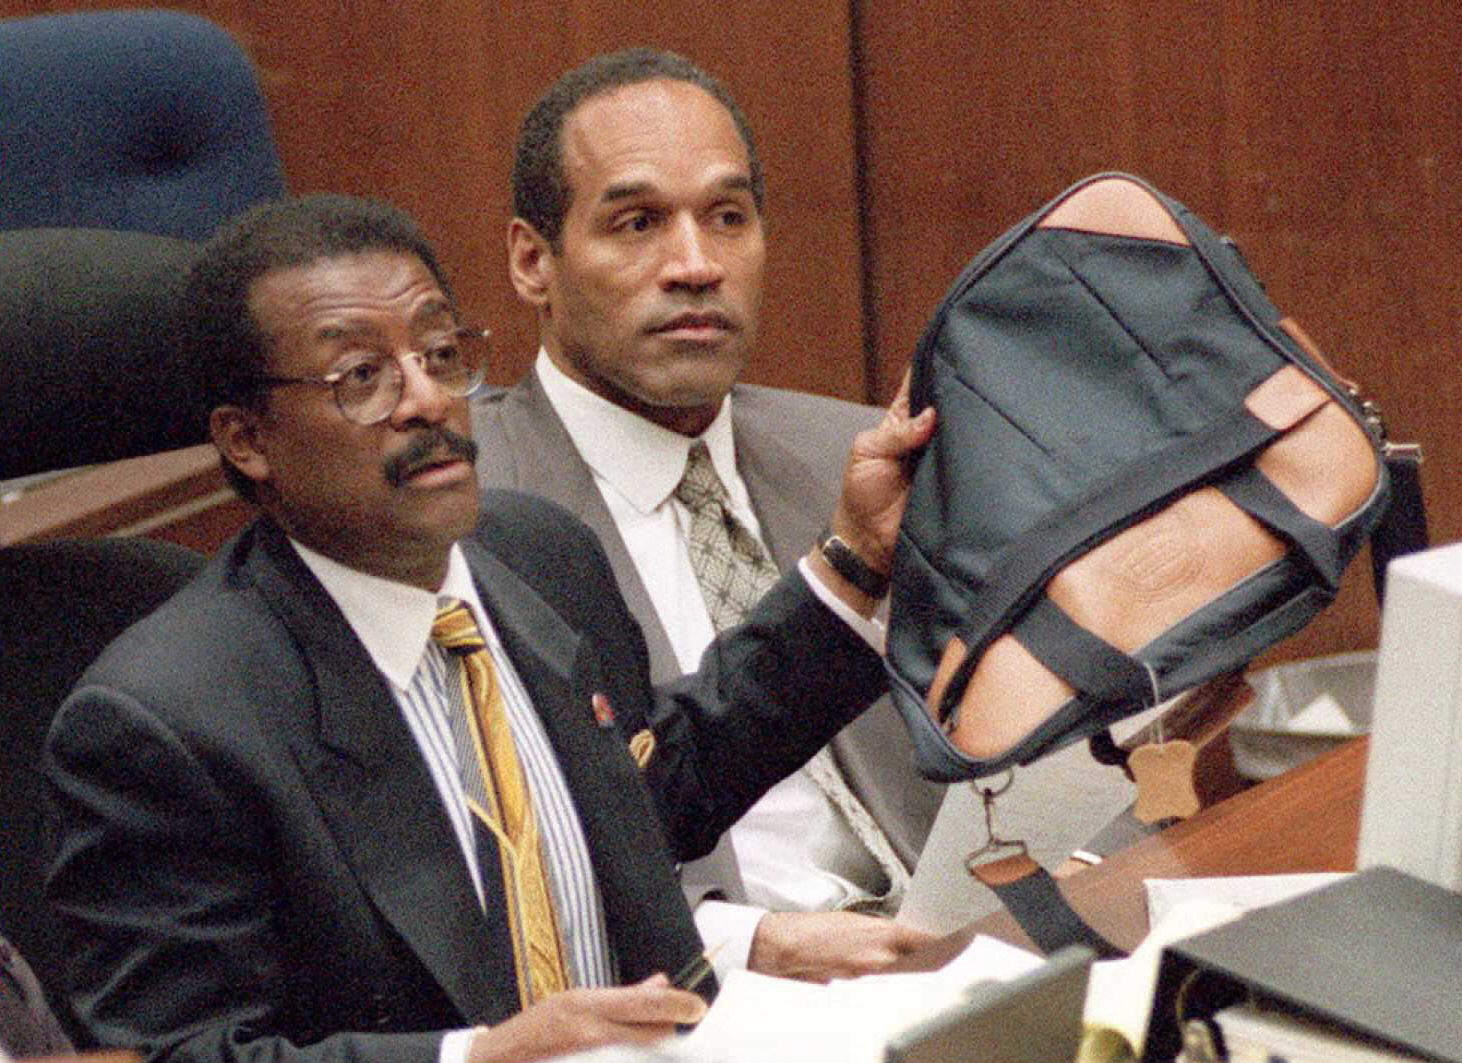 Defense attorney Johnnie Cochran Jr (L) holds up a luggage bag during court session in the O.J. Simpson (R) murder trial. A limousine driver and baggage handler were questioned about Simpson's luggage which he used to travel to Chicago on the night of the double murder. AFP via Getty Images